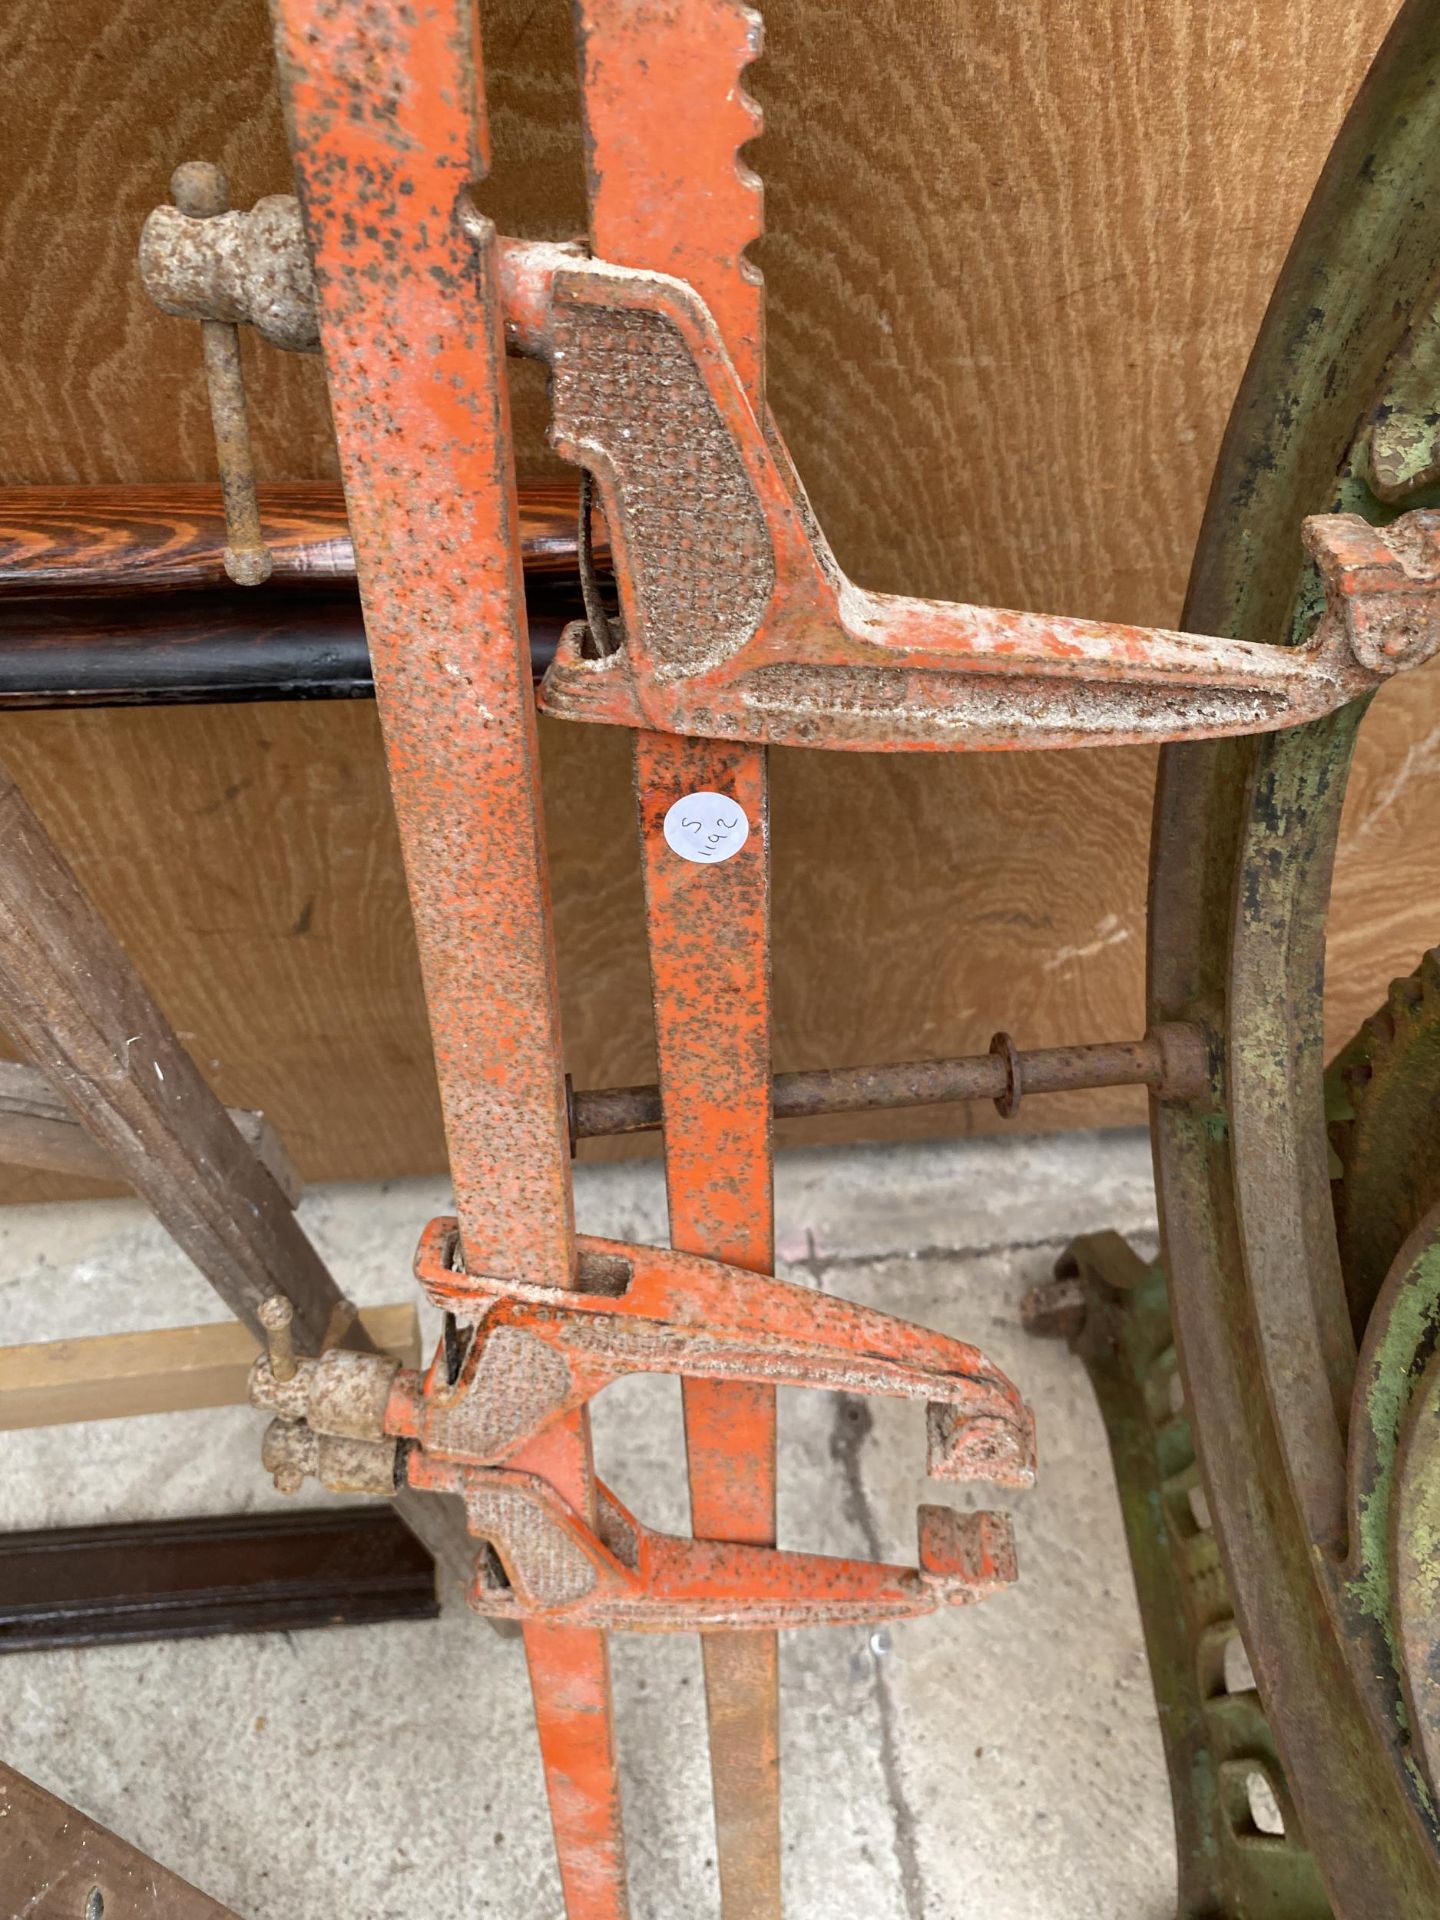 A PAIR OF VINTAGE METAL SASH CLAMPS - Image 2 of 2